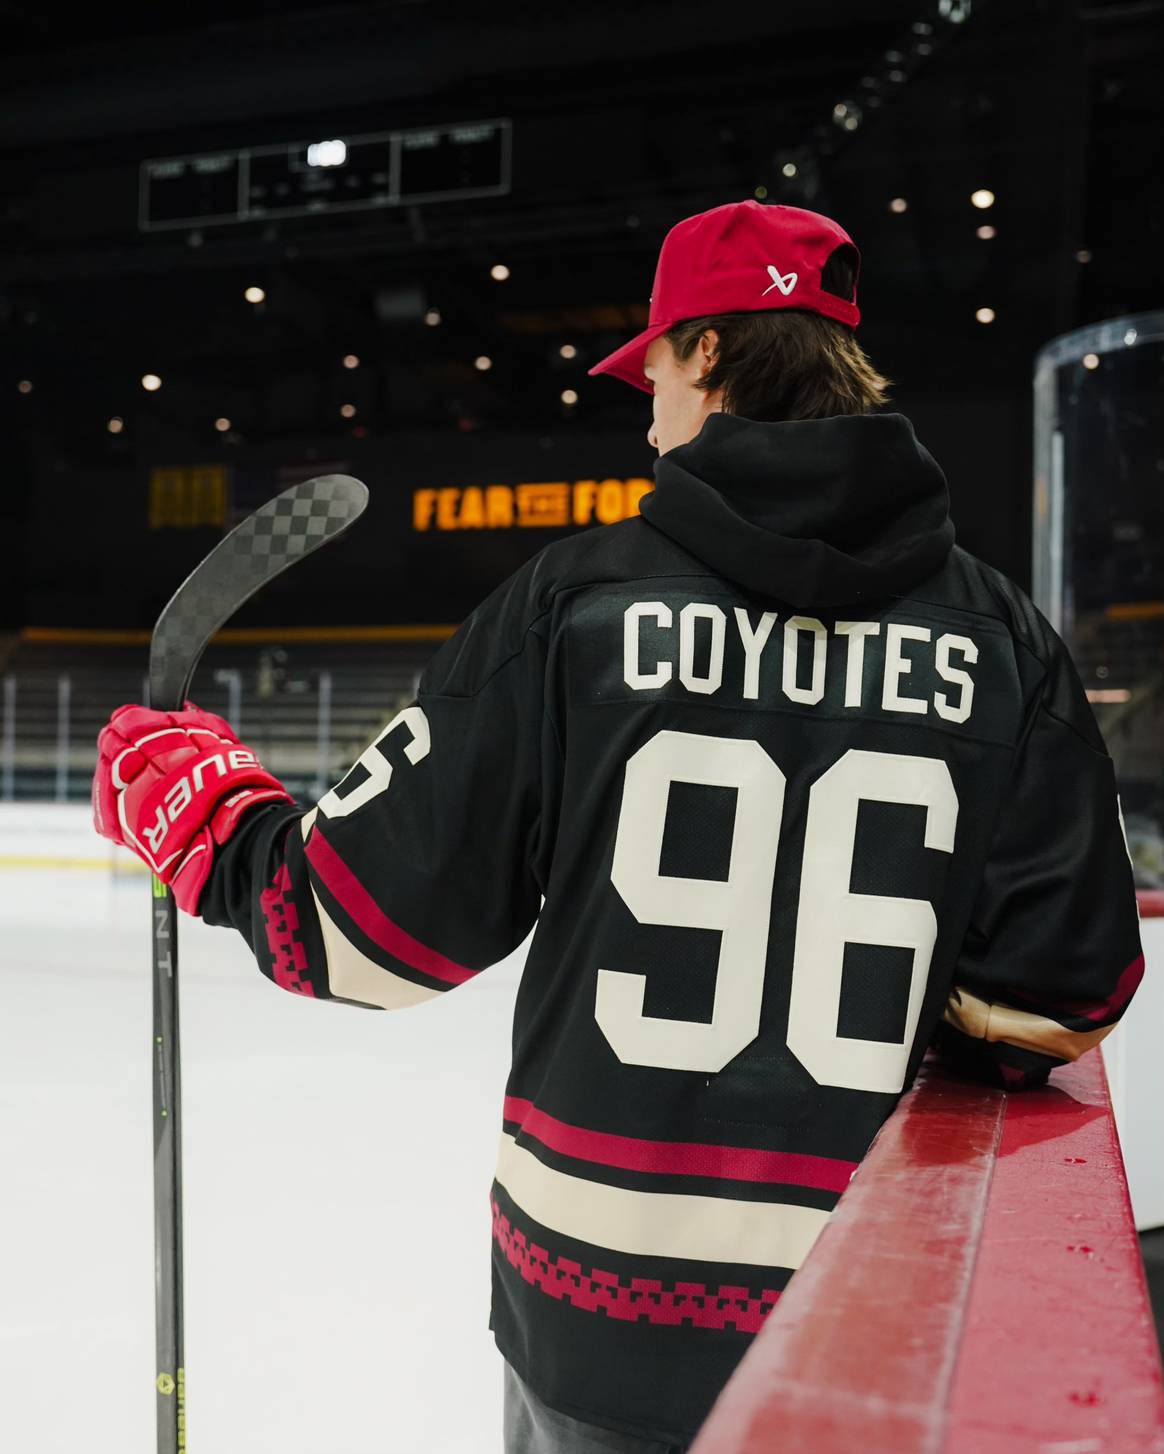 Apparel line designed by Doni Nahmias for the Arizona Coyotes and Bauer Hockey.